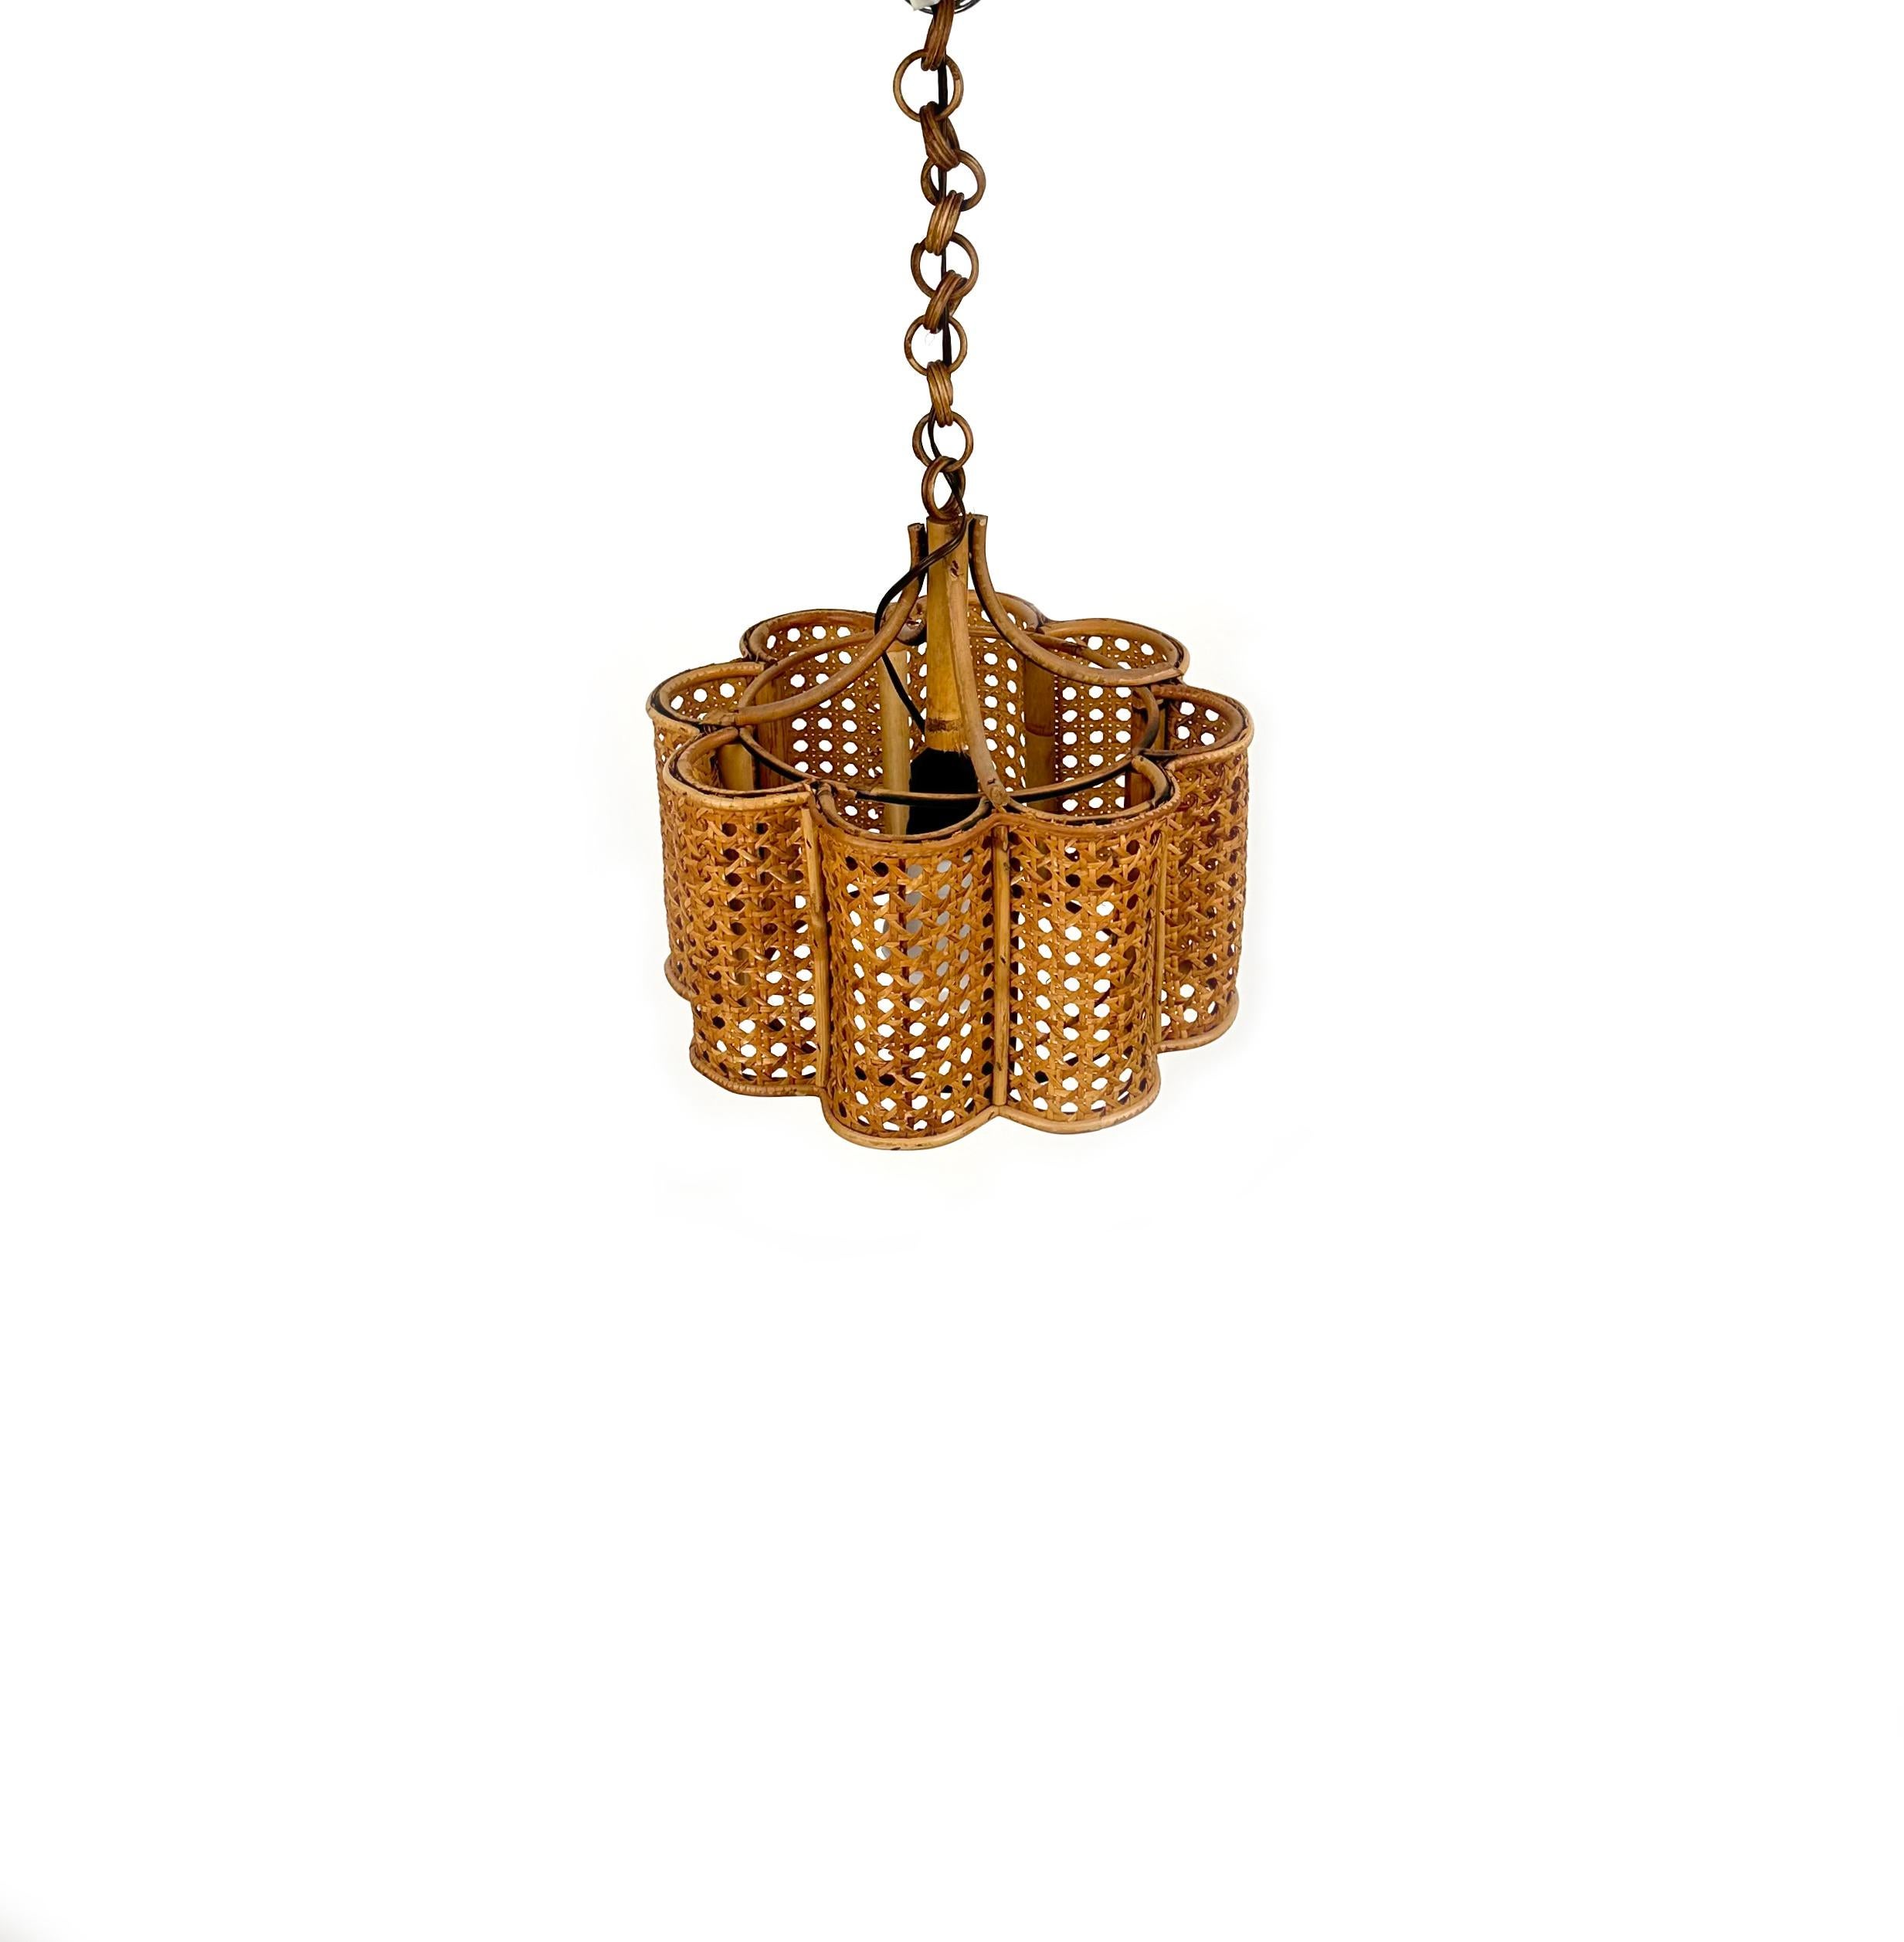 Beautiful Midcentury chandelier in rattan and wicker.

Made in Italy in the 1960s.